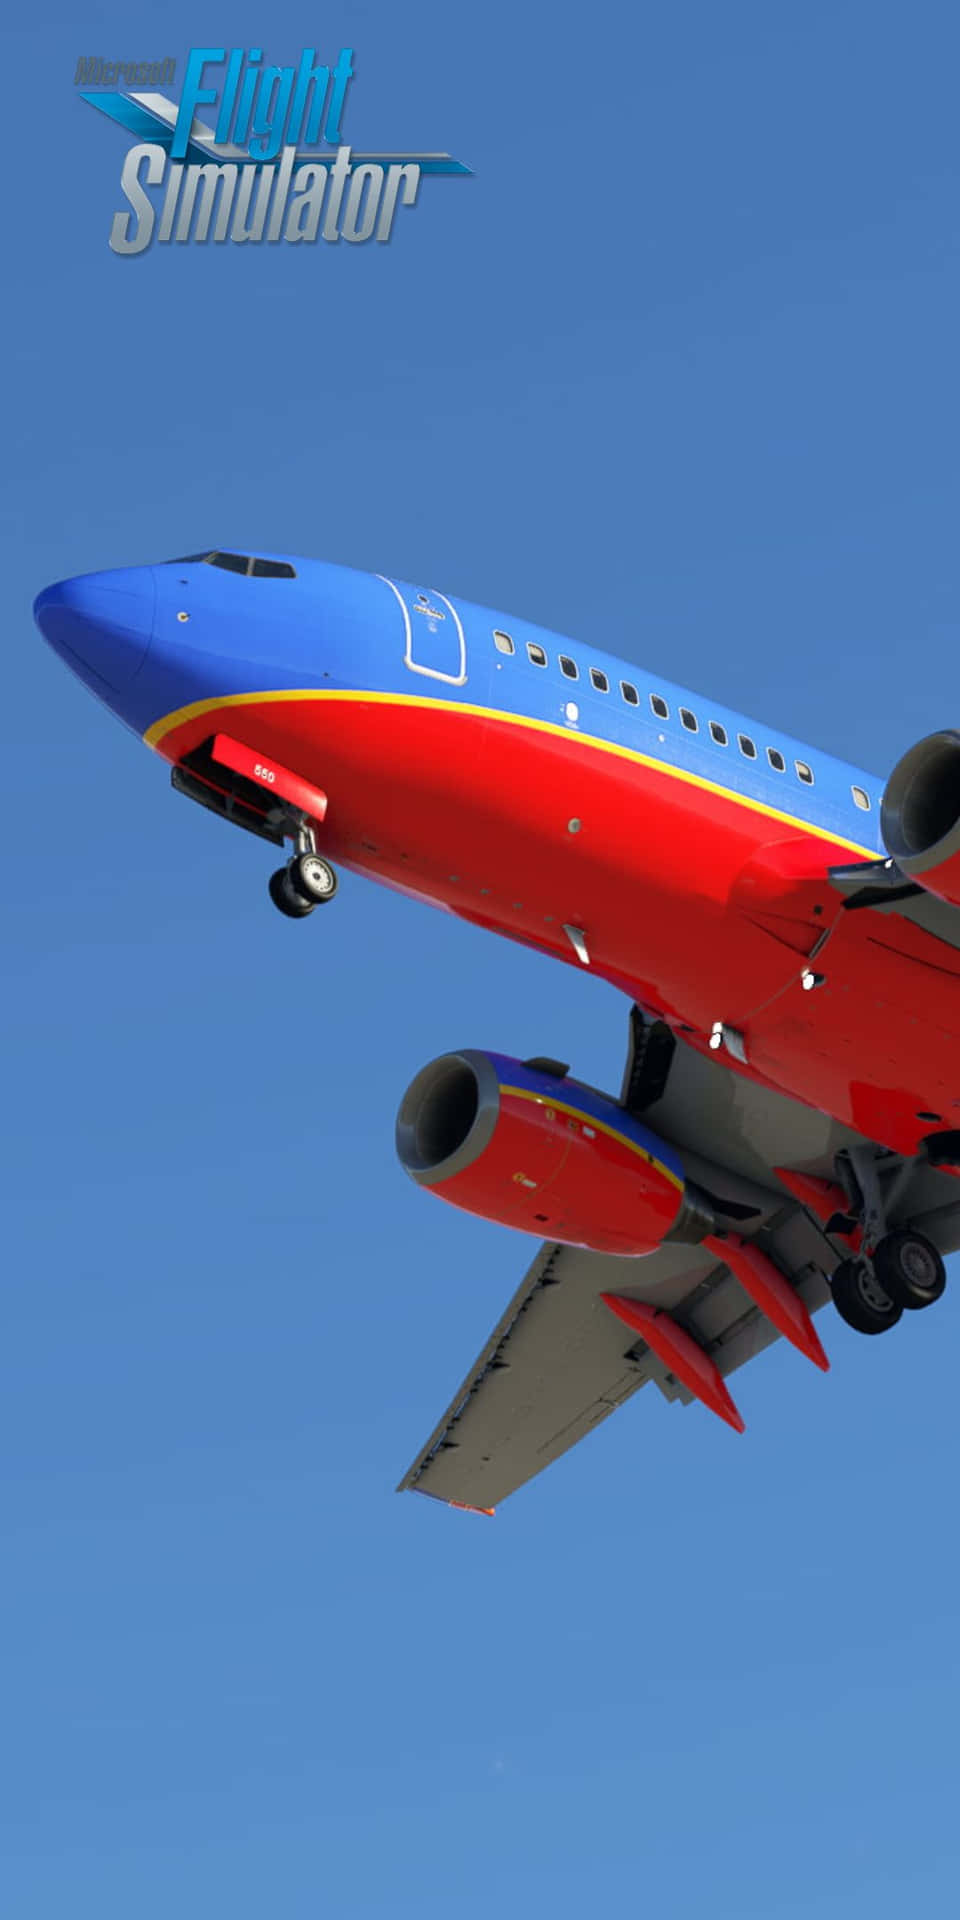 A Blue And Red Airplane Flying In The Sky